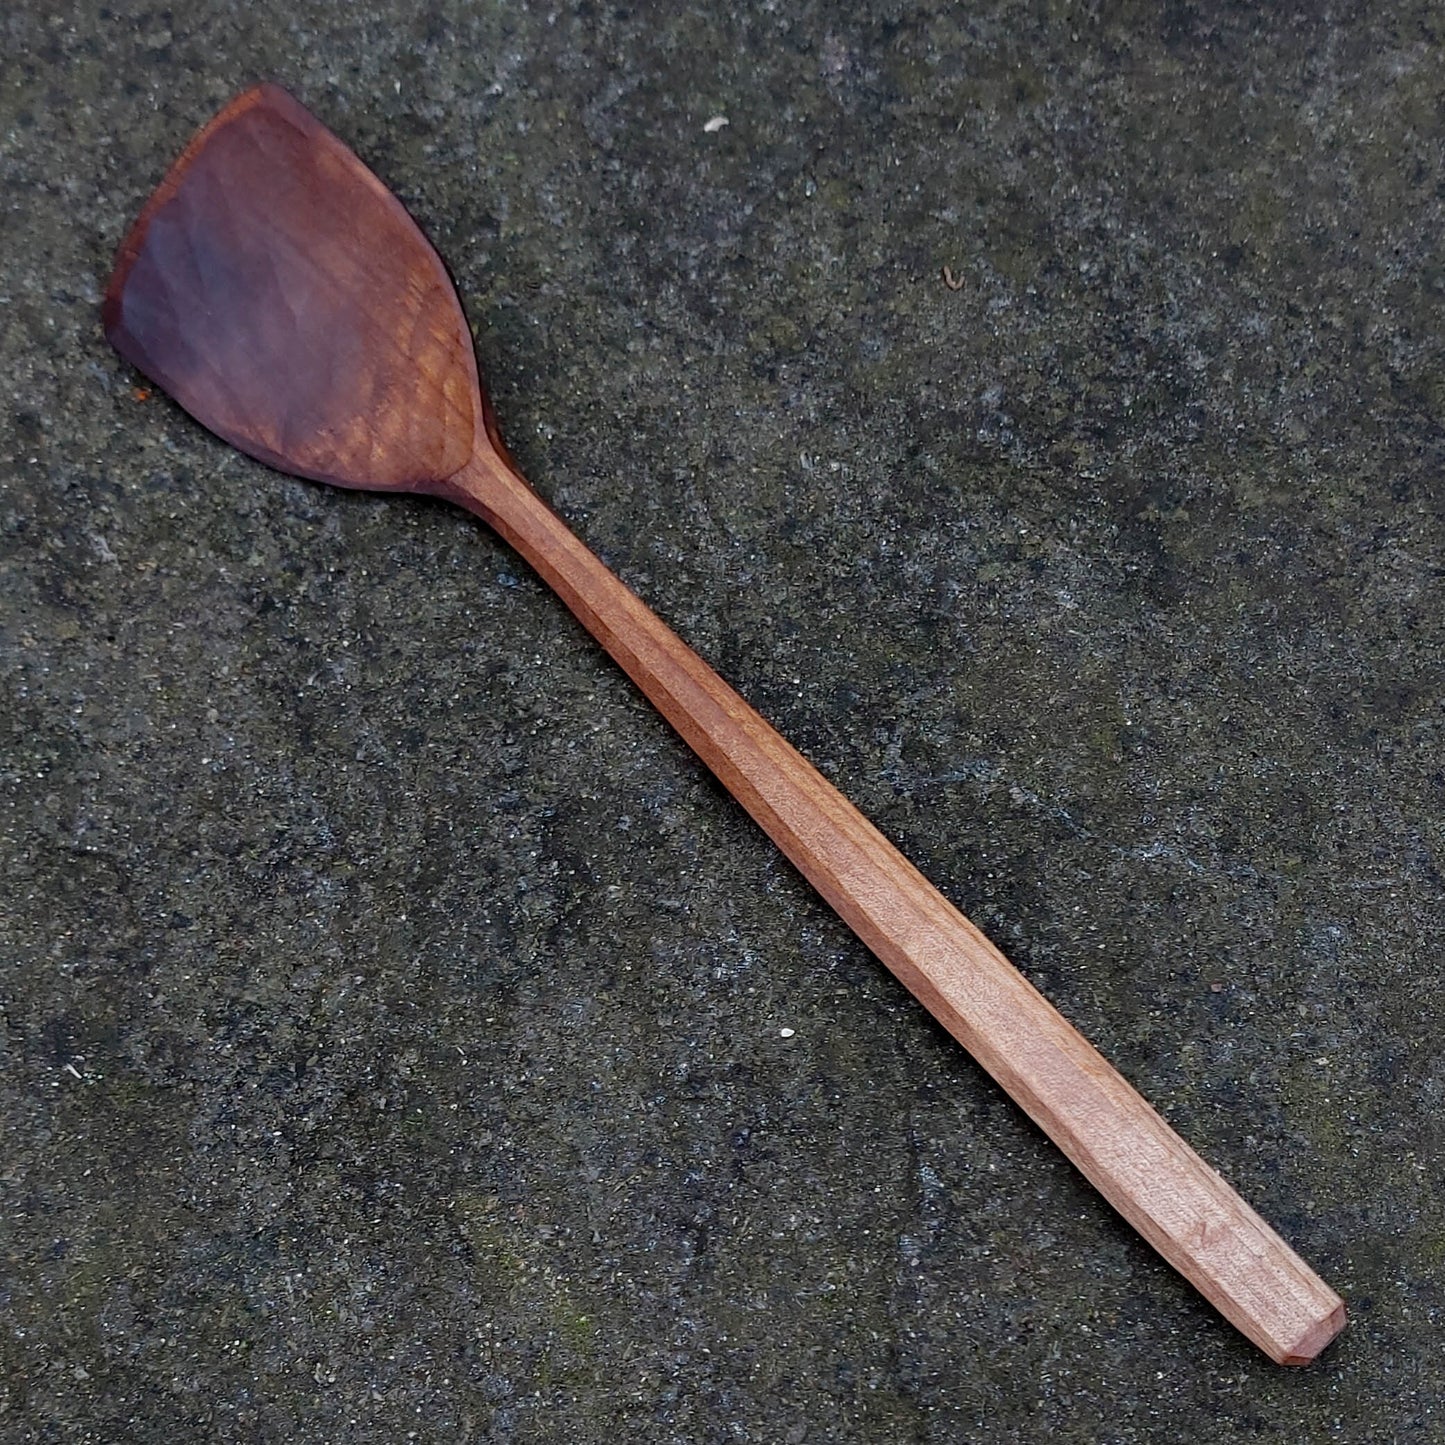 Roasted Serving Spoon